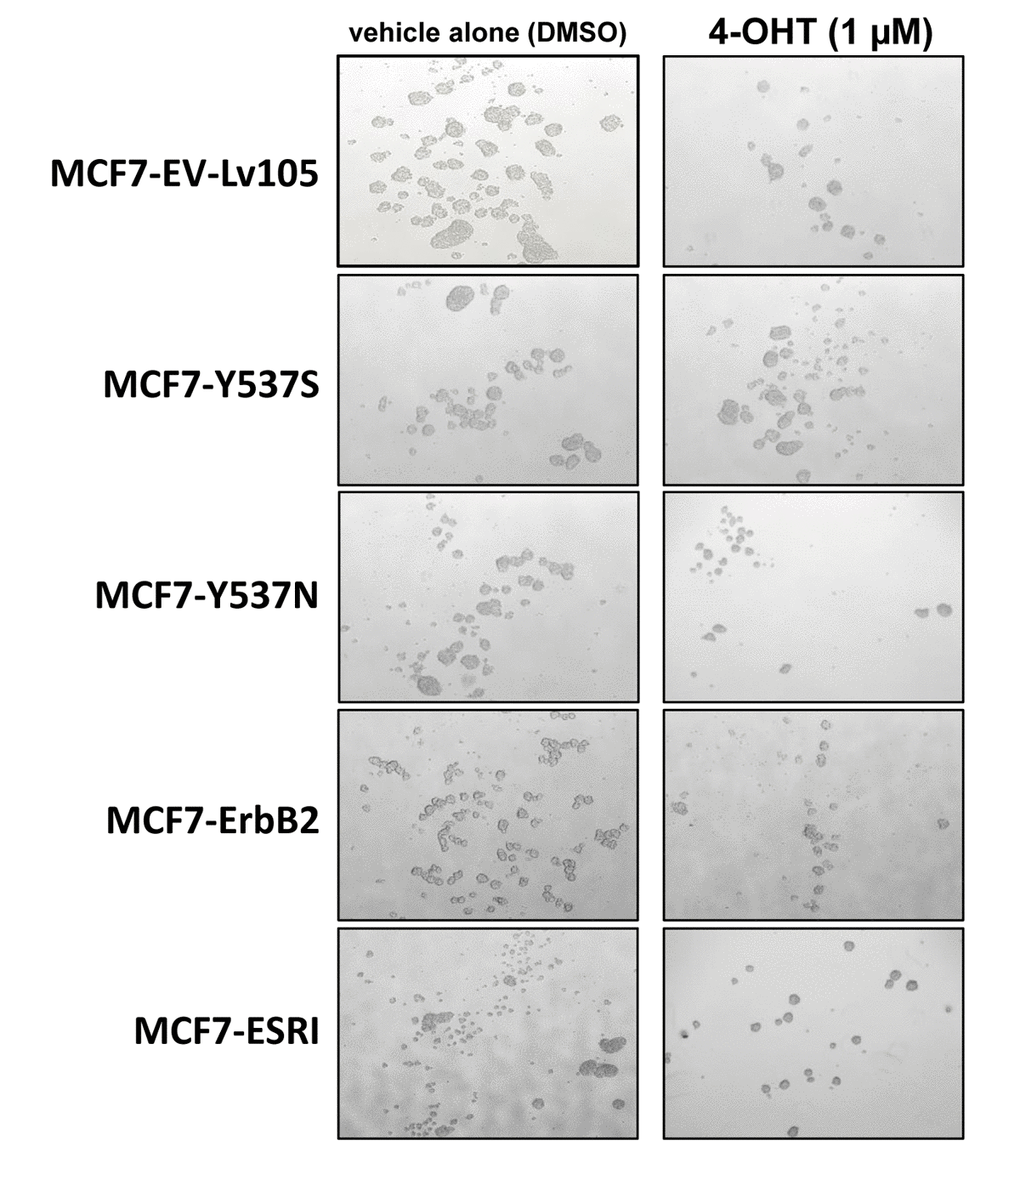 MCF7-Y537S cells are resistant to the inhibitory effects of Tamoxifen during mammosphere formation: Representative images. Note that overall 4-OHT (1 µM) treatement reduces mammosphere formation; however, MCF7-Y537S cells remain largely unaffected. Representative images are shown. The MCF7-Y537S cells show an obvious resistance to 4-OHT. The images were obtained with an Olympus microscope (4X objective, bright field).